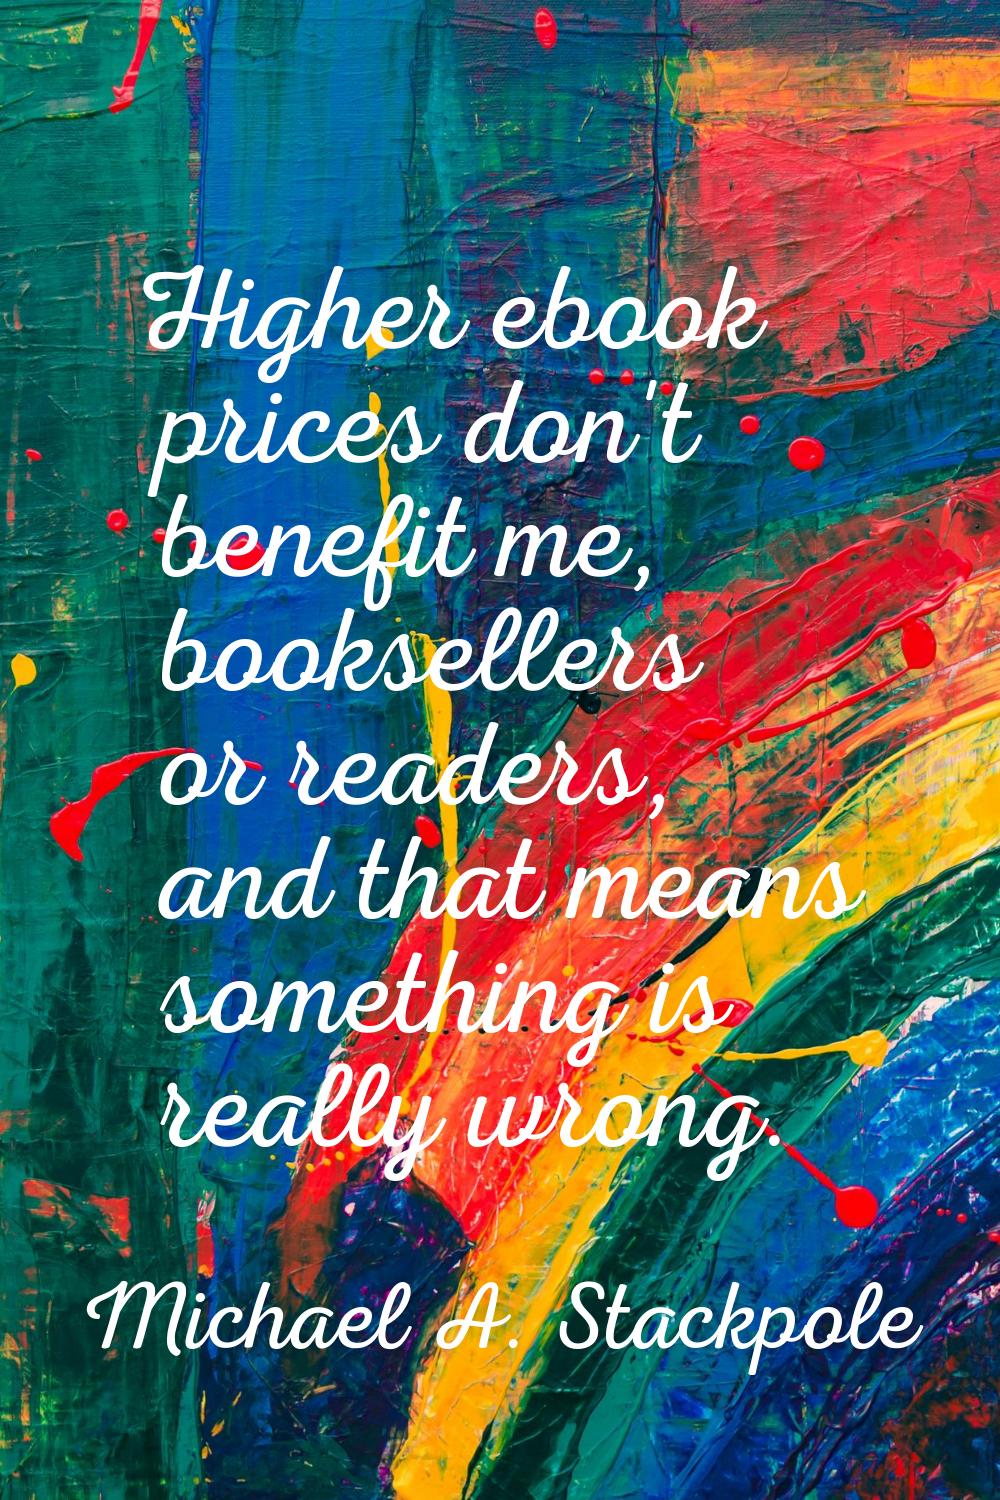 Higher ebook prices don't benefit me, booksellers or readers, and that means something is really wr